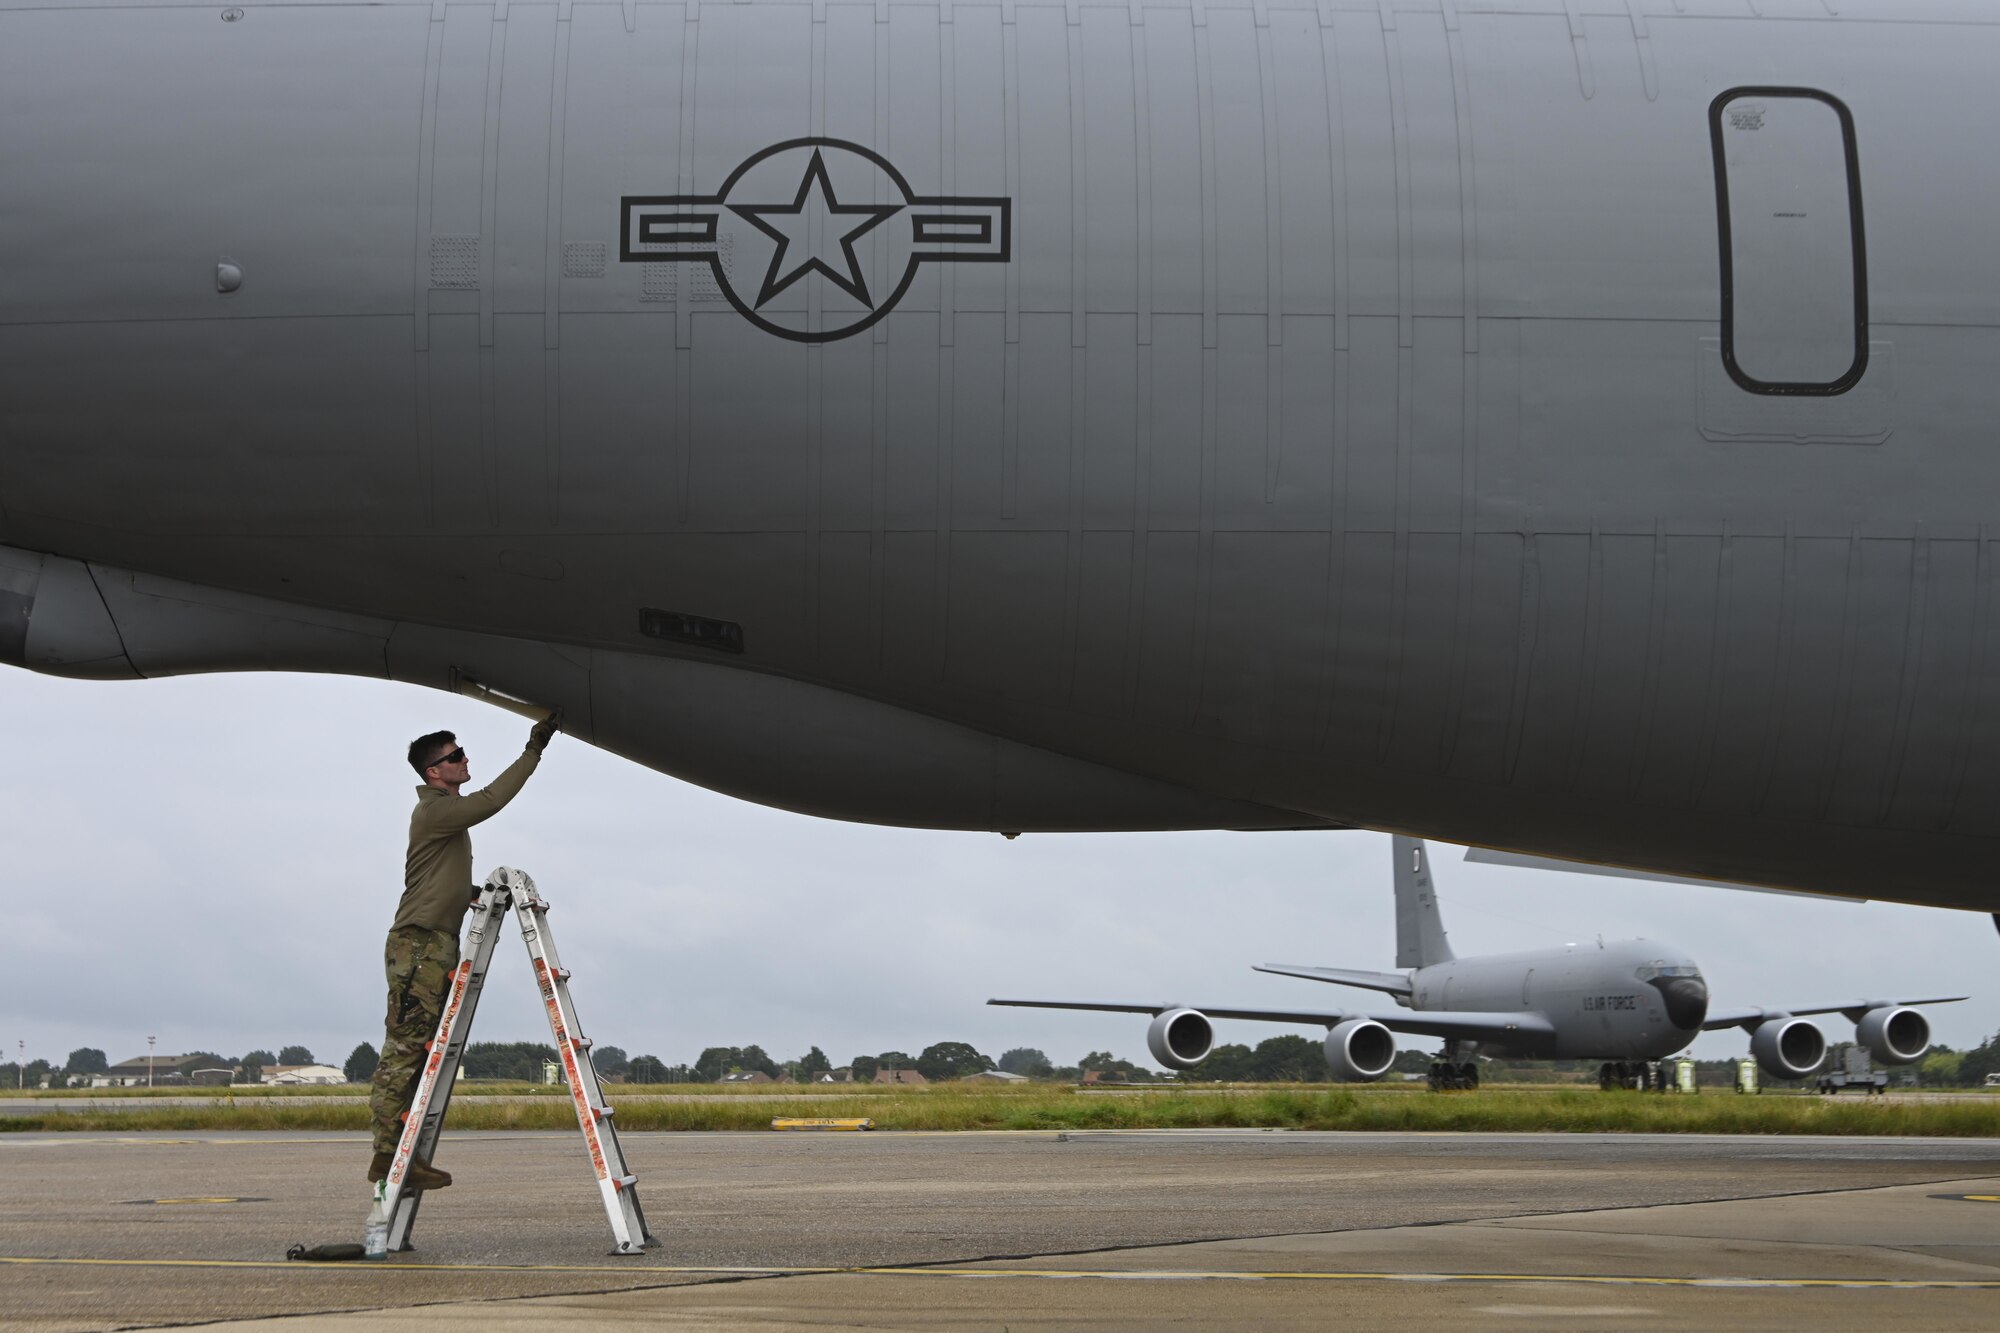 U.S. Air Force Staff Sgt. Lane Lucas, 100th Aircraft Maintenance Squadron crew chief, performs post-flight maintenance on the boom pod window of a KC-135 Stratotanker aircraft at Royal Air Force Mildenhall, England, Aug. 31, 2021. The 100th AMXS supports the 100th Air Refueling Wing's mission of providing air refueling capability throughout Europe and Africa. (U.S. Air Force photo by Senior Airman Joseph Barron)